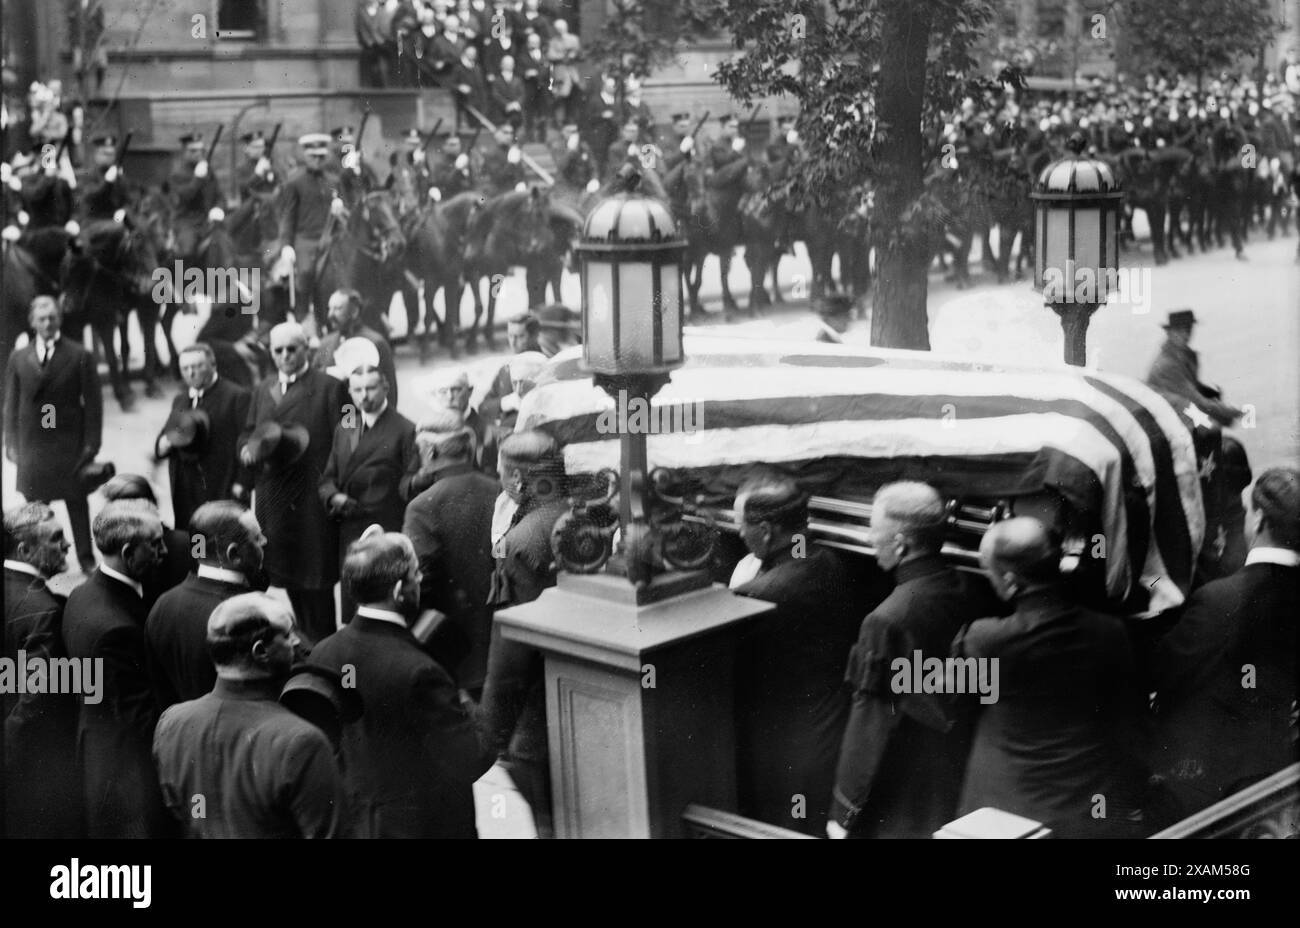 Taking Gaynor coffin from home to lie in state in City Hall, 1913. Shows coffin outside of William Jay Gaynor's home at 20 Eighth Ave., Brooklyn, New York. Gaynor (1849-1913) was the Mayor of New York City. Stock Photo